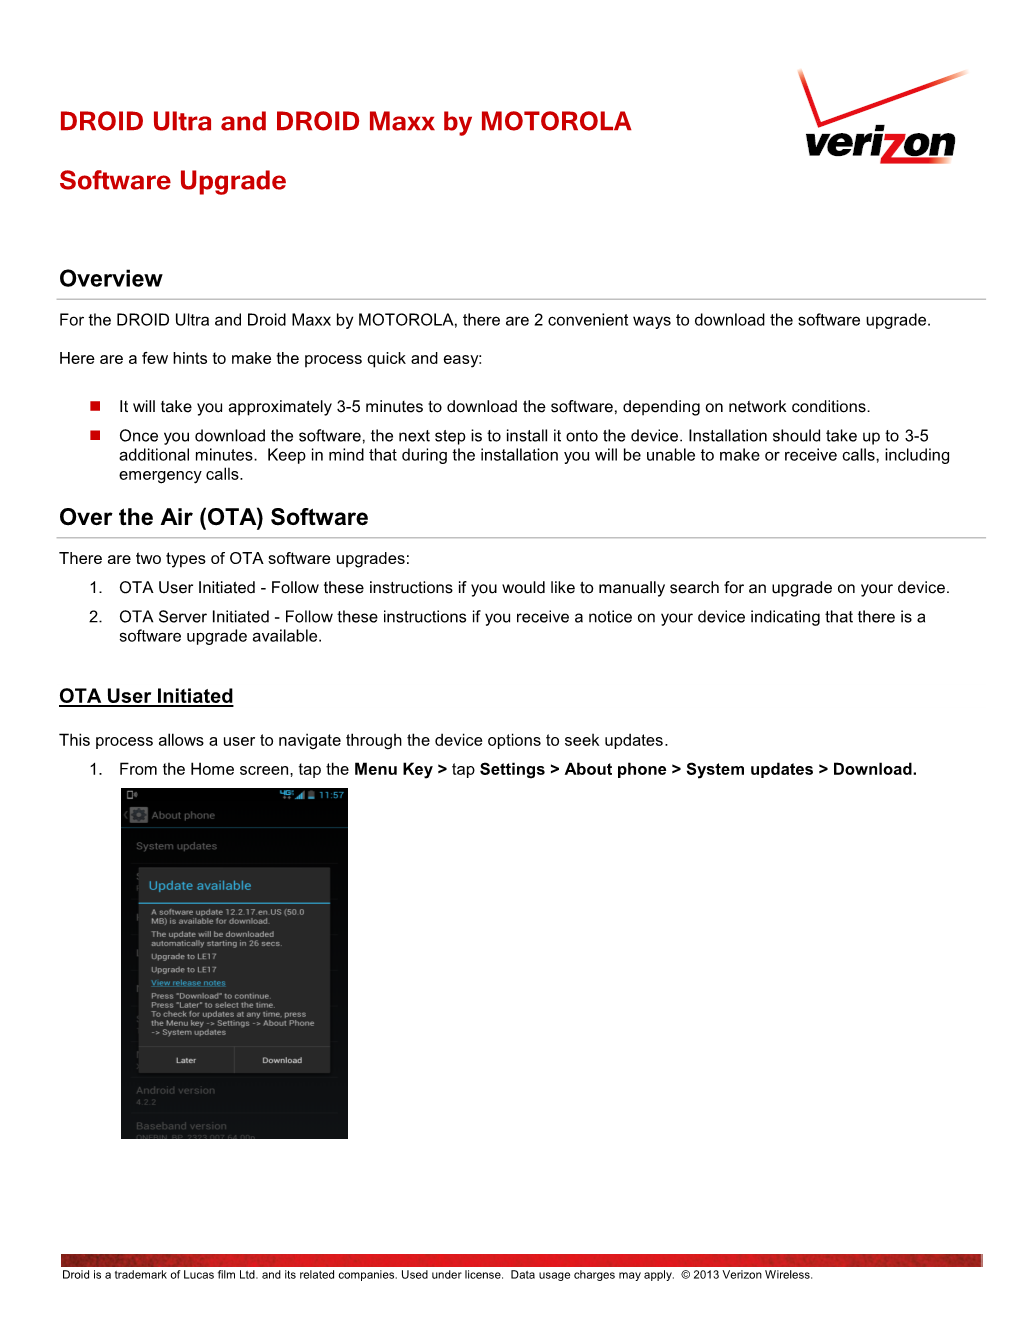 DROID Ultra and DROID Maxx by MOTOROLA Software Upgrade